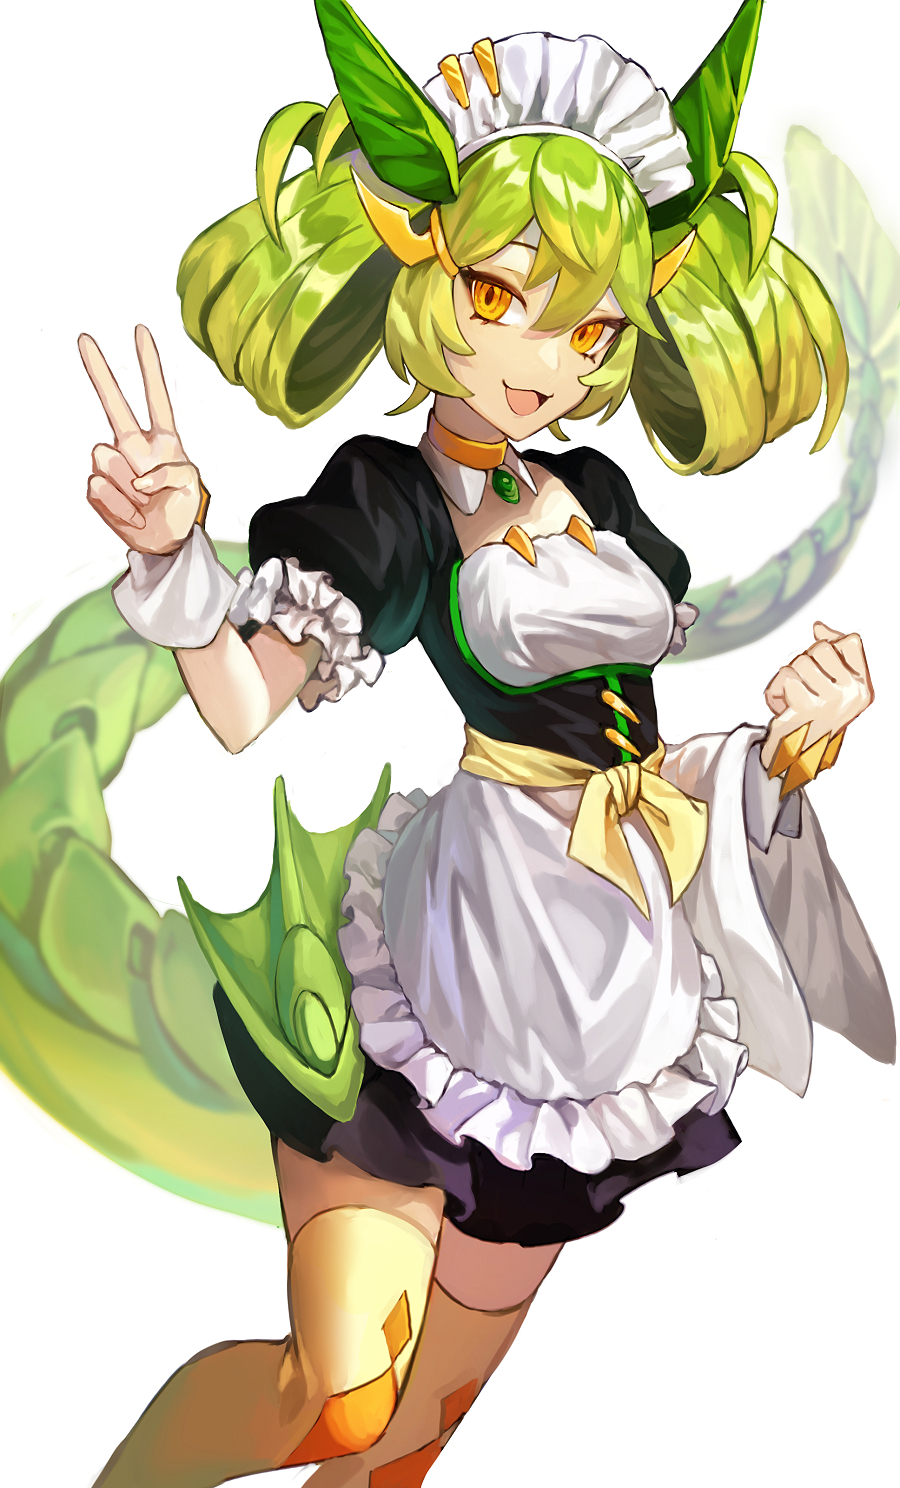 Anime Anime Girls Trading Card Games Yu Gi Oh Maid Maid Outfit Parlor Dragonmaid Twintails Green Hai 900x1488